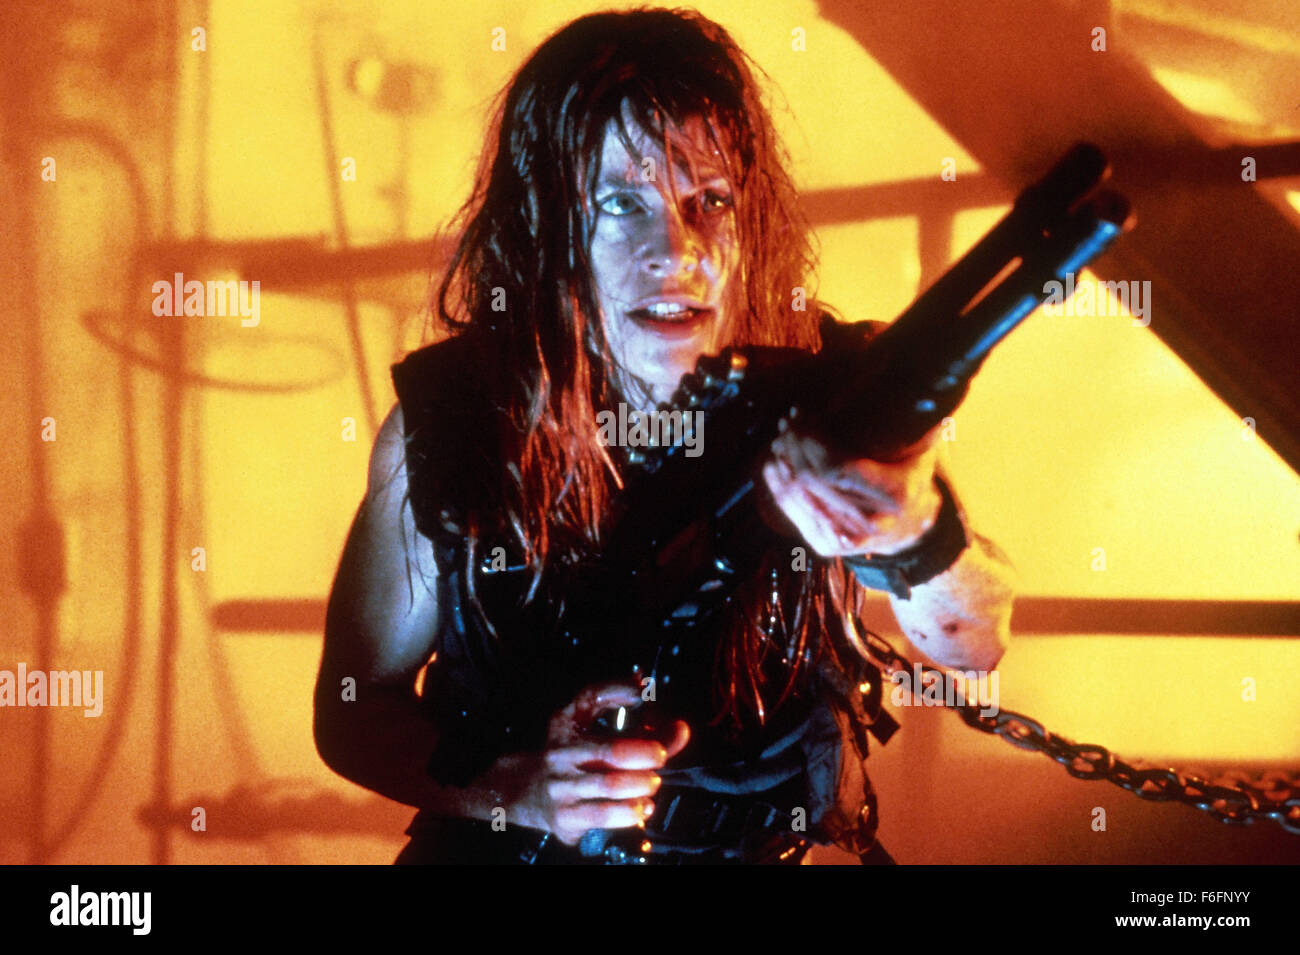 RELEASE DATE: July 3, 1991. MOVIE TITLE: Terminator 2: Judgment Day. STUDIO: TriStar Pictures. PLOT: The cyborg who once tried to kill Sarah Connor must now protect her teenage son, John Connor, from an even more powerful and advanced Terminator. PICTURED: LINDA HAMILTON as Sarah Connor Stock Photo